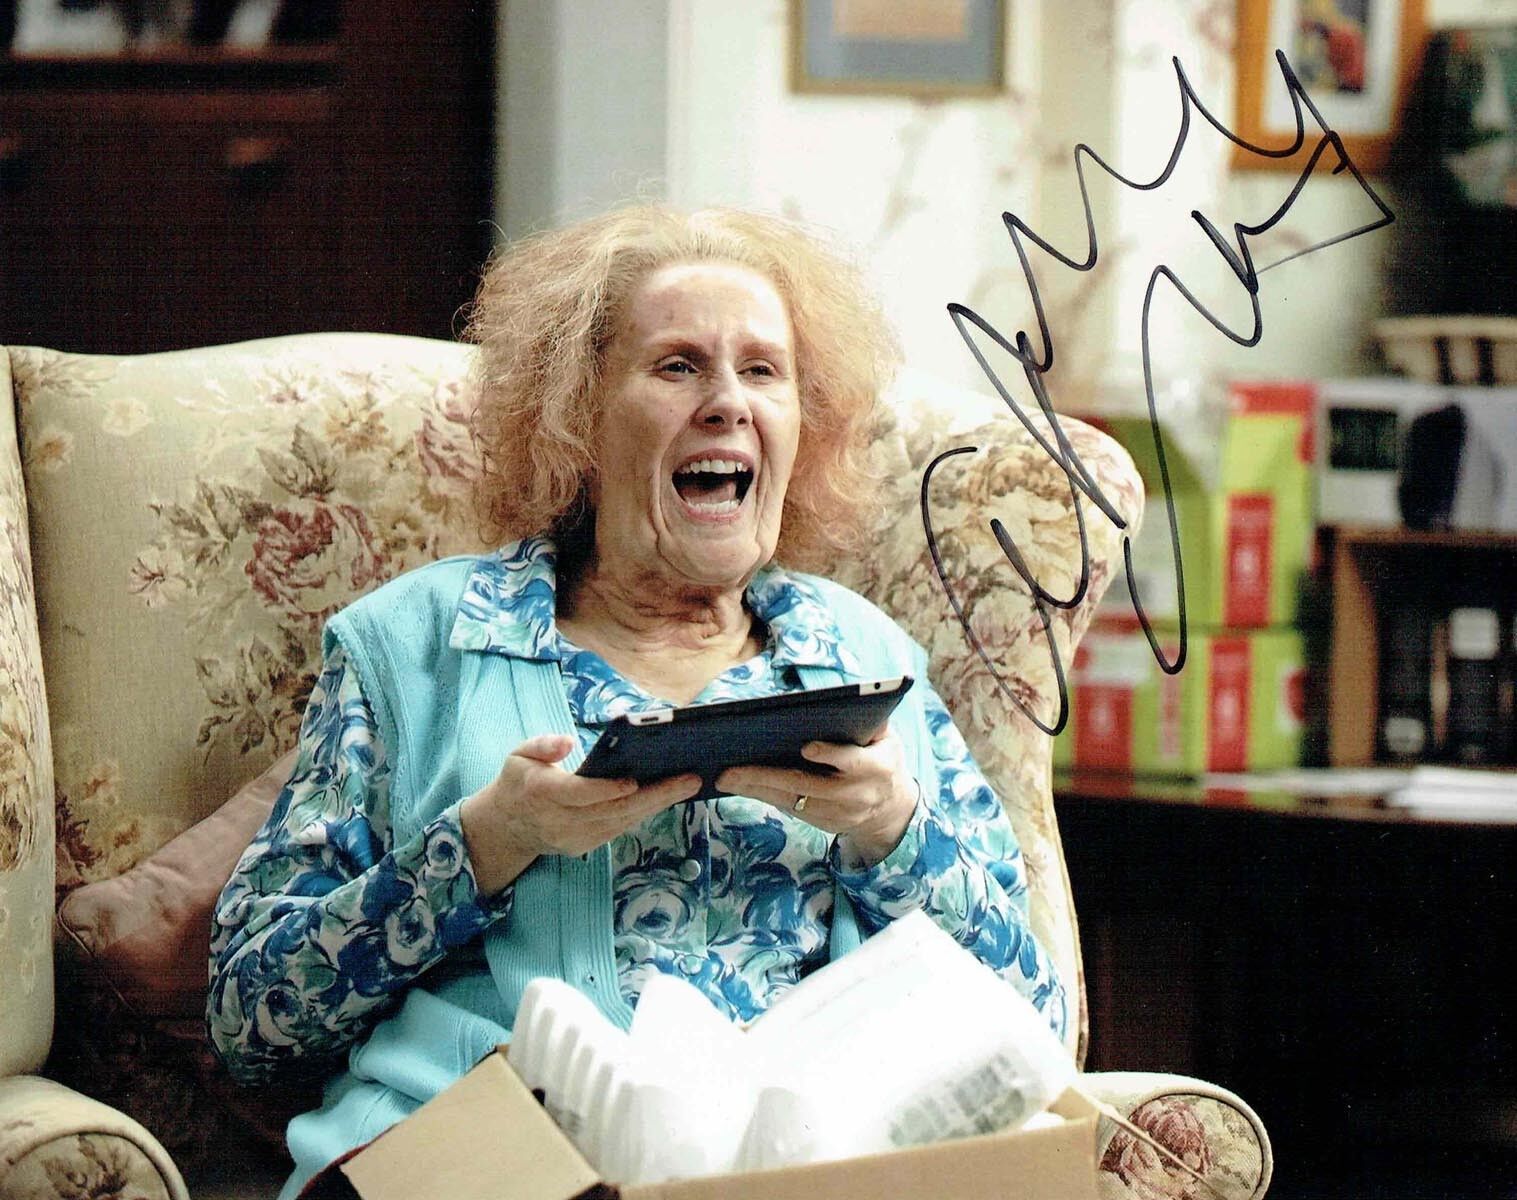 Catherine TATE SIGNED Autograph 10x8 Photo Poster painting 1 AFTAL COA NAN Comedian Actress